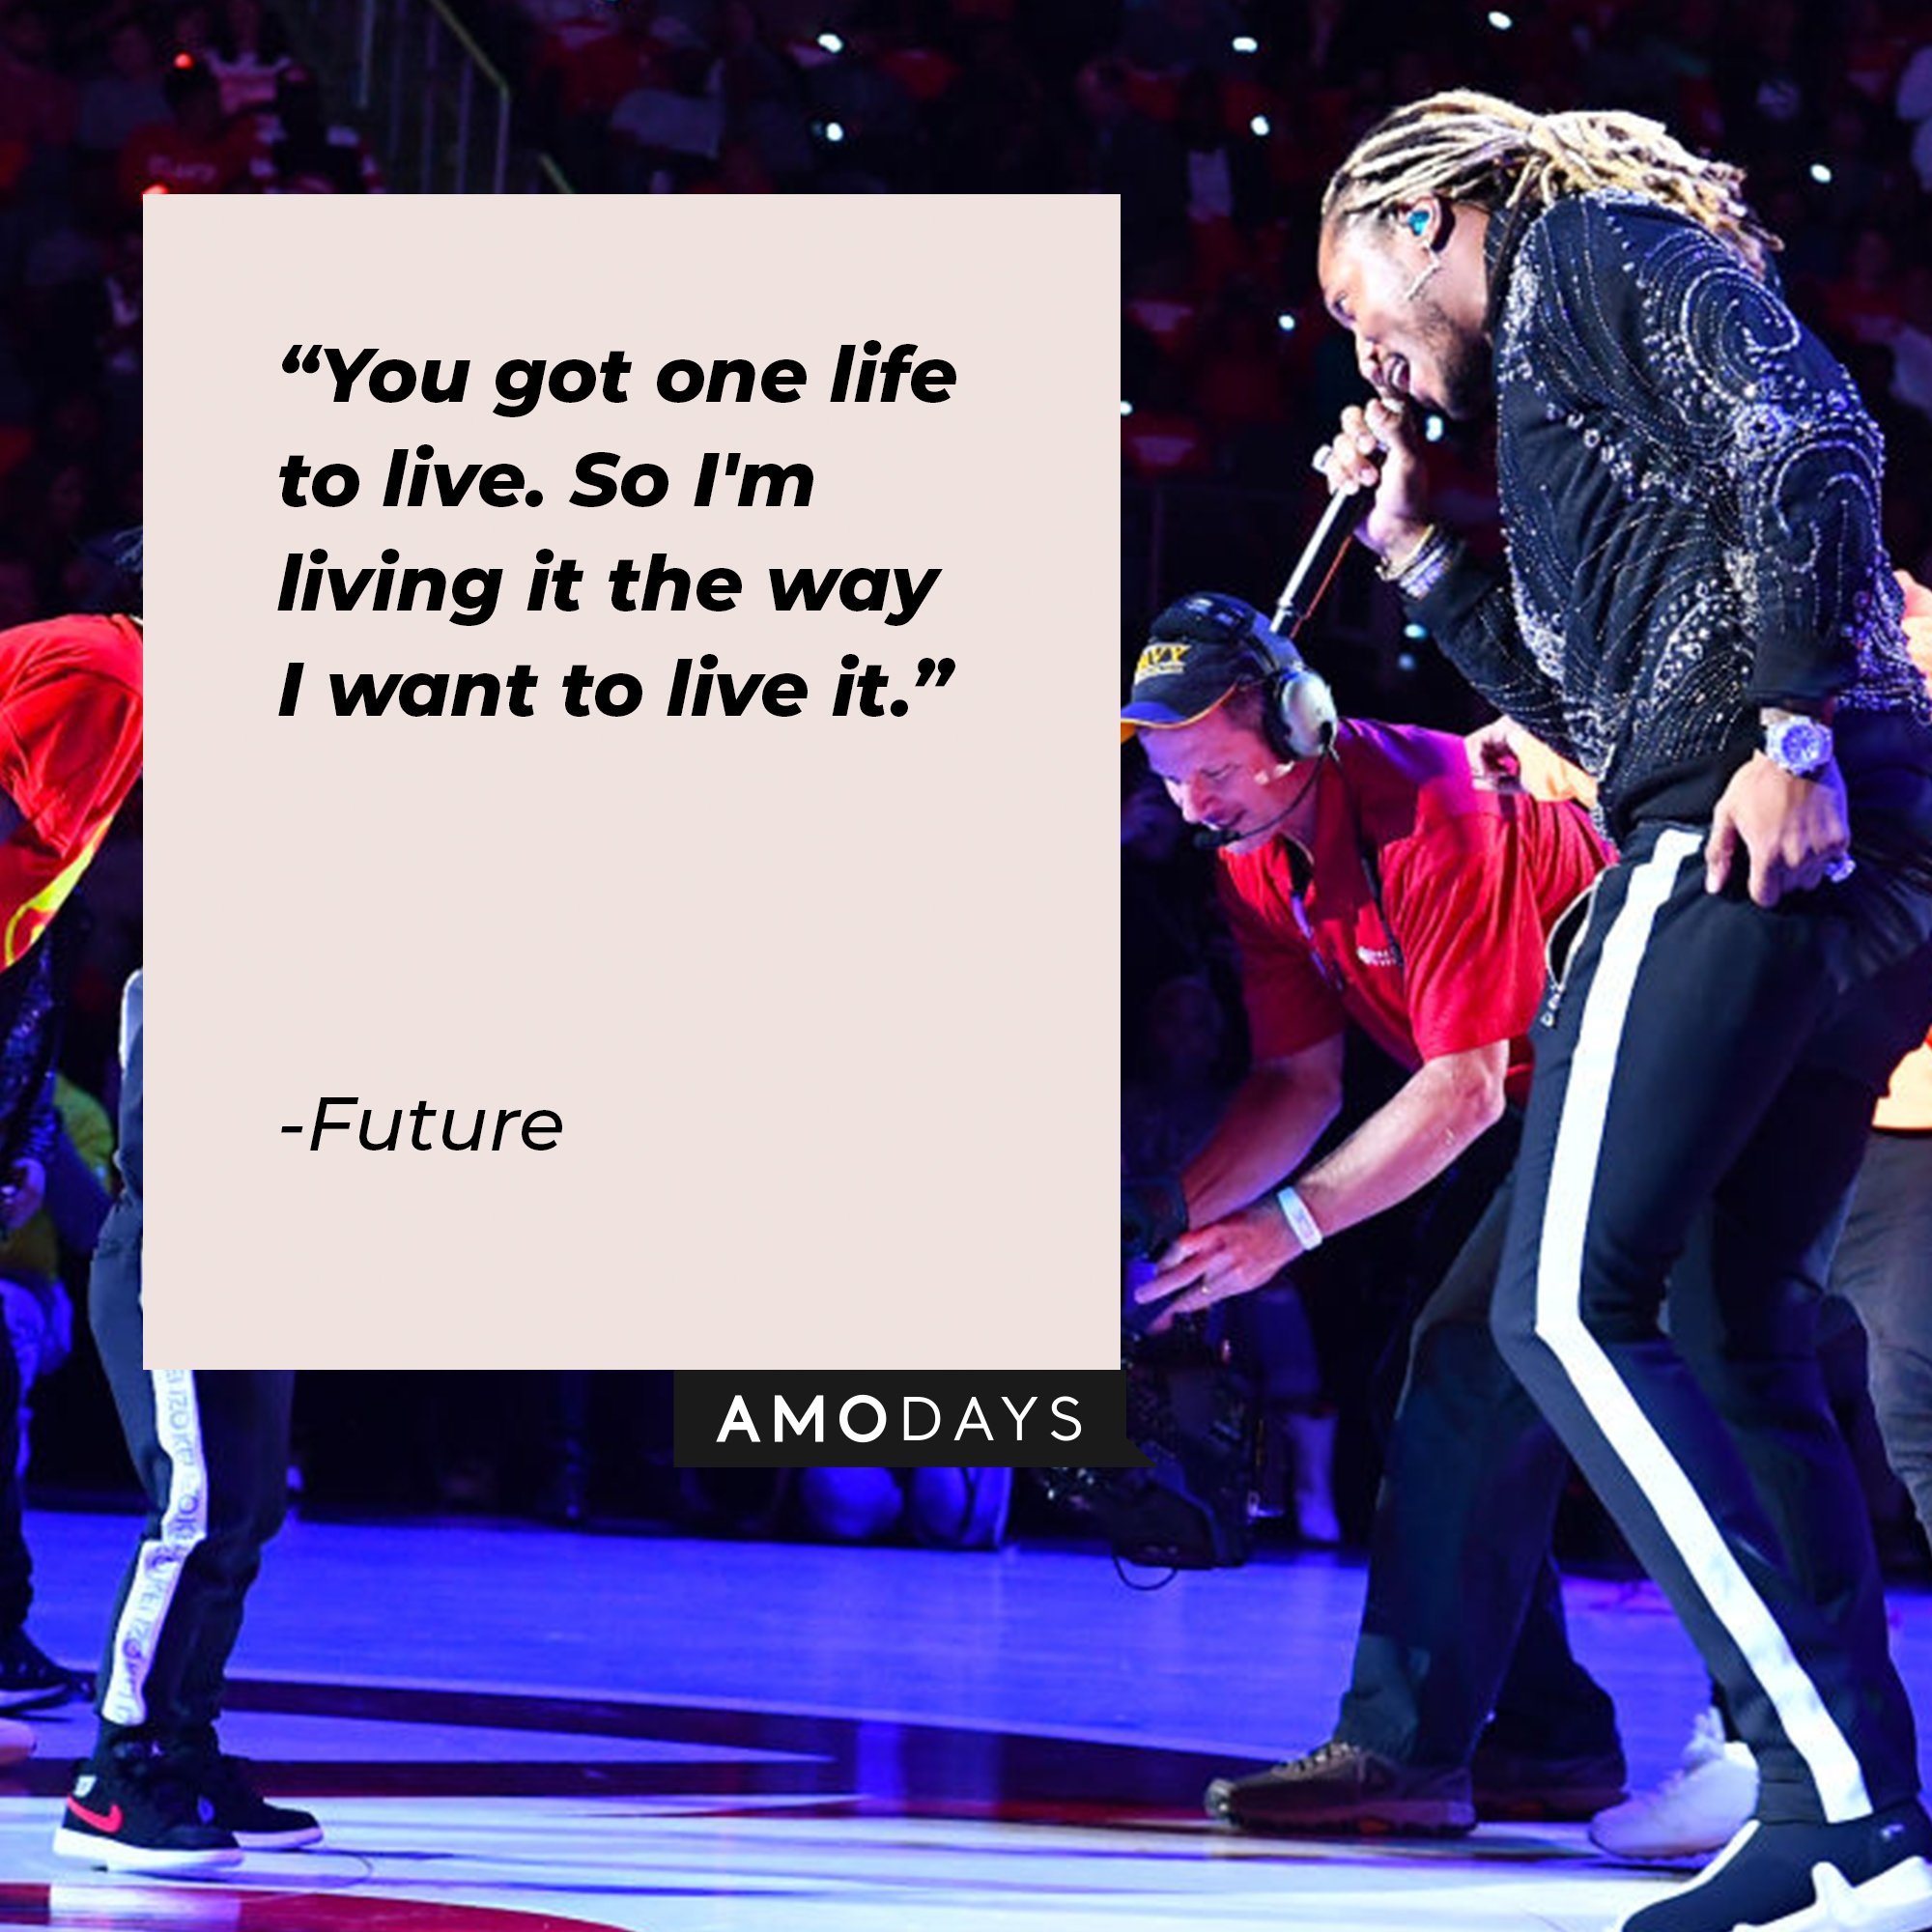 Future’s quote: "You got one life to live. So I'm living it the way I want to live it." | Image: AmoDays